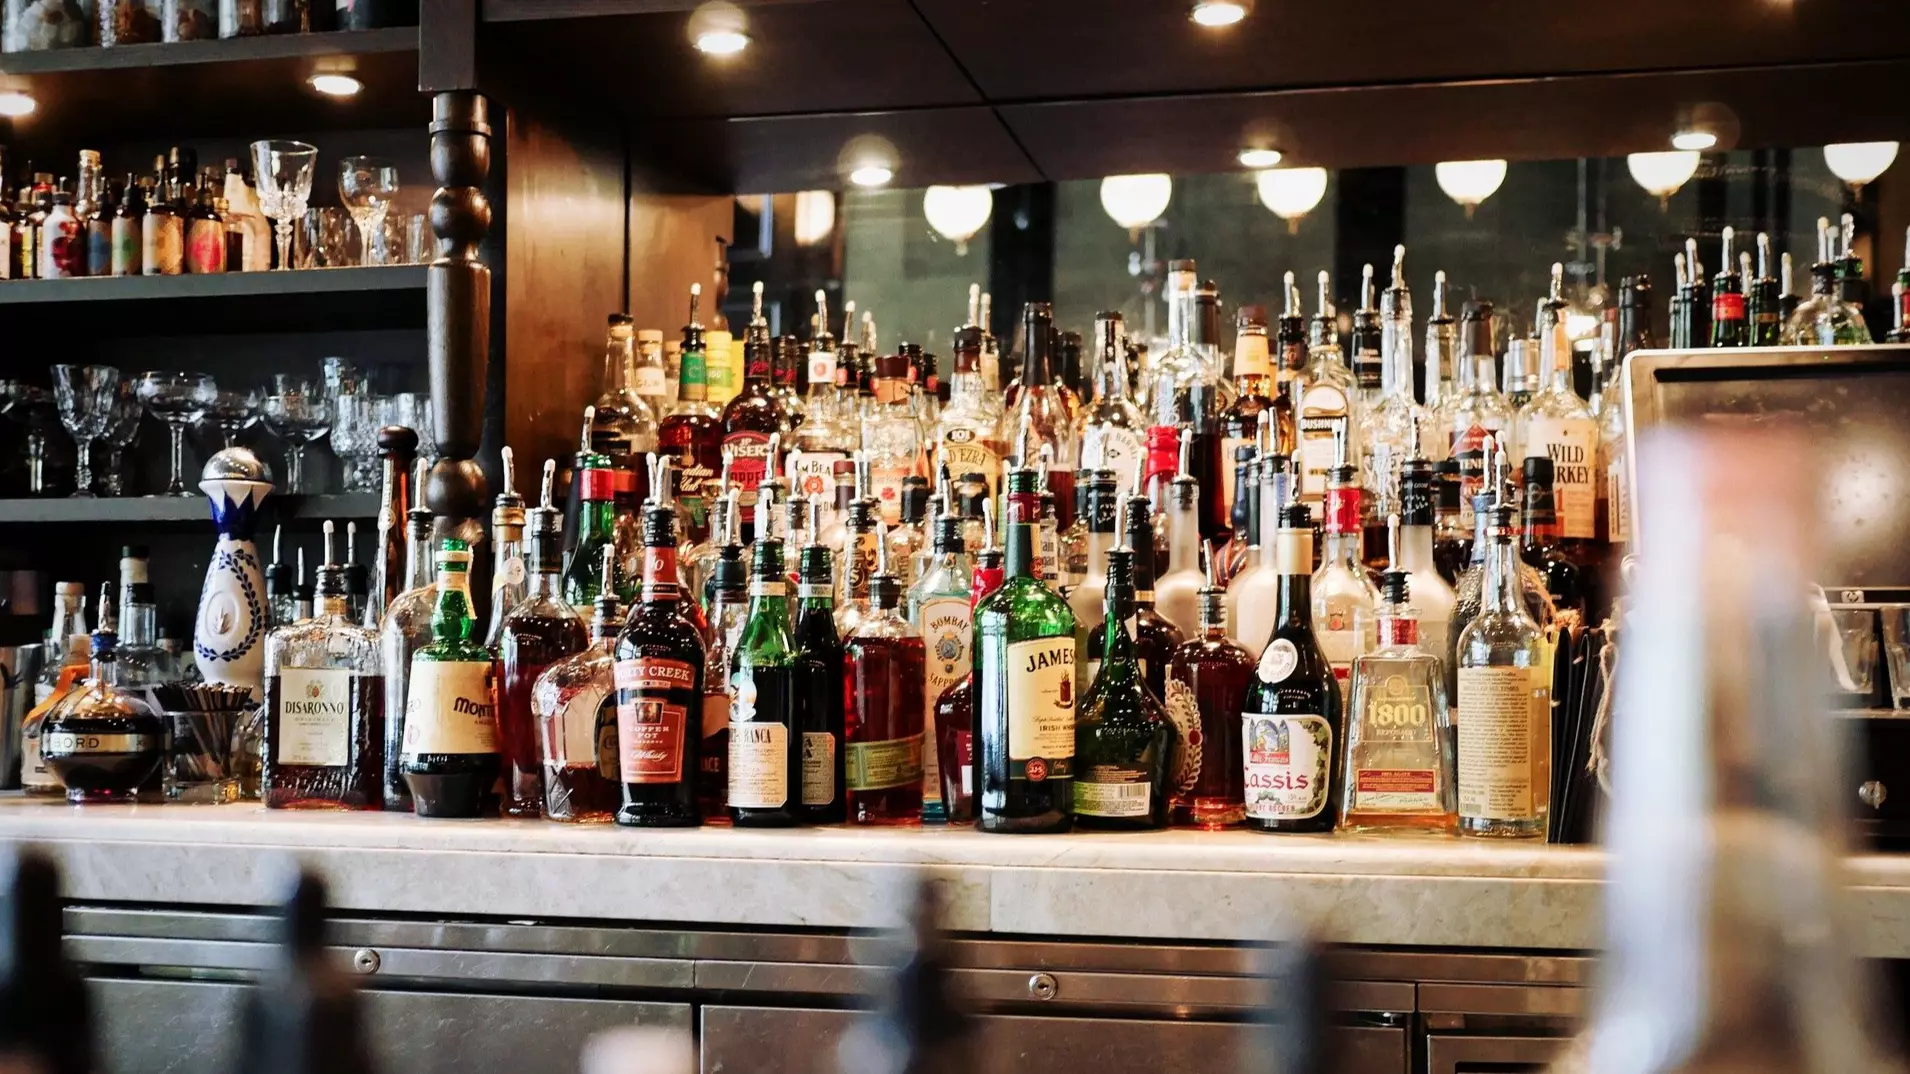 Man Awarded $5.5 Million Lawsuit After Claiming Bar Served Him Too Much Alcohol